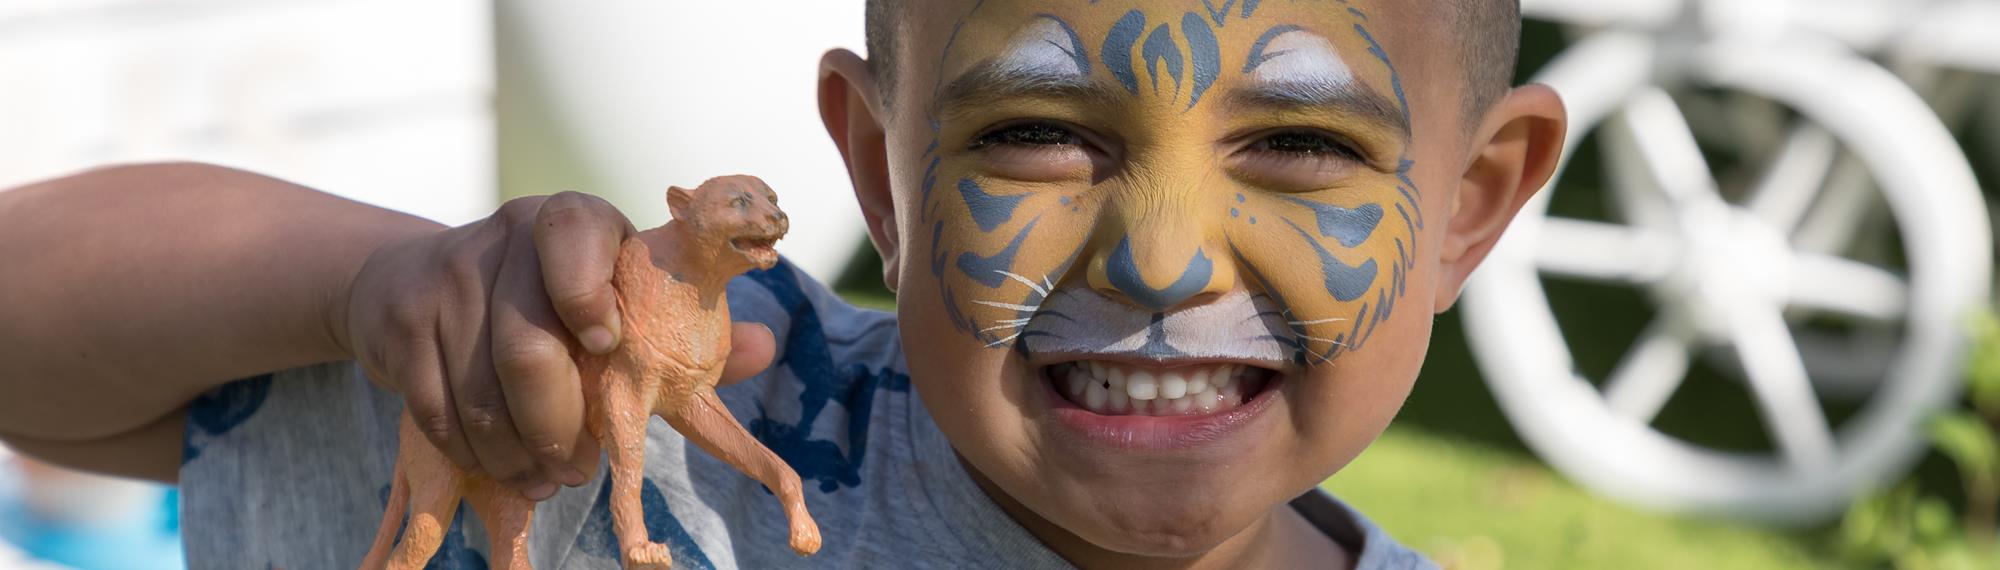 A young guest with Cheetah face-paint and holding a Cheetah figure, playfully snarling like a Cheetah.